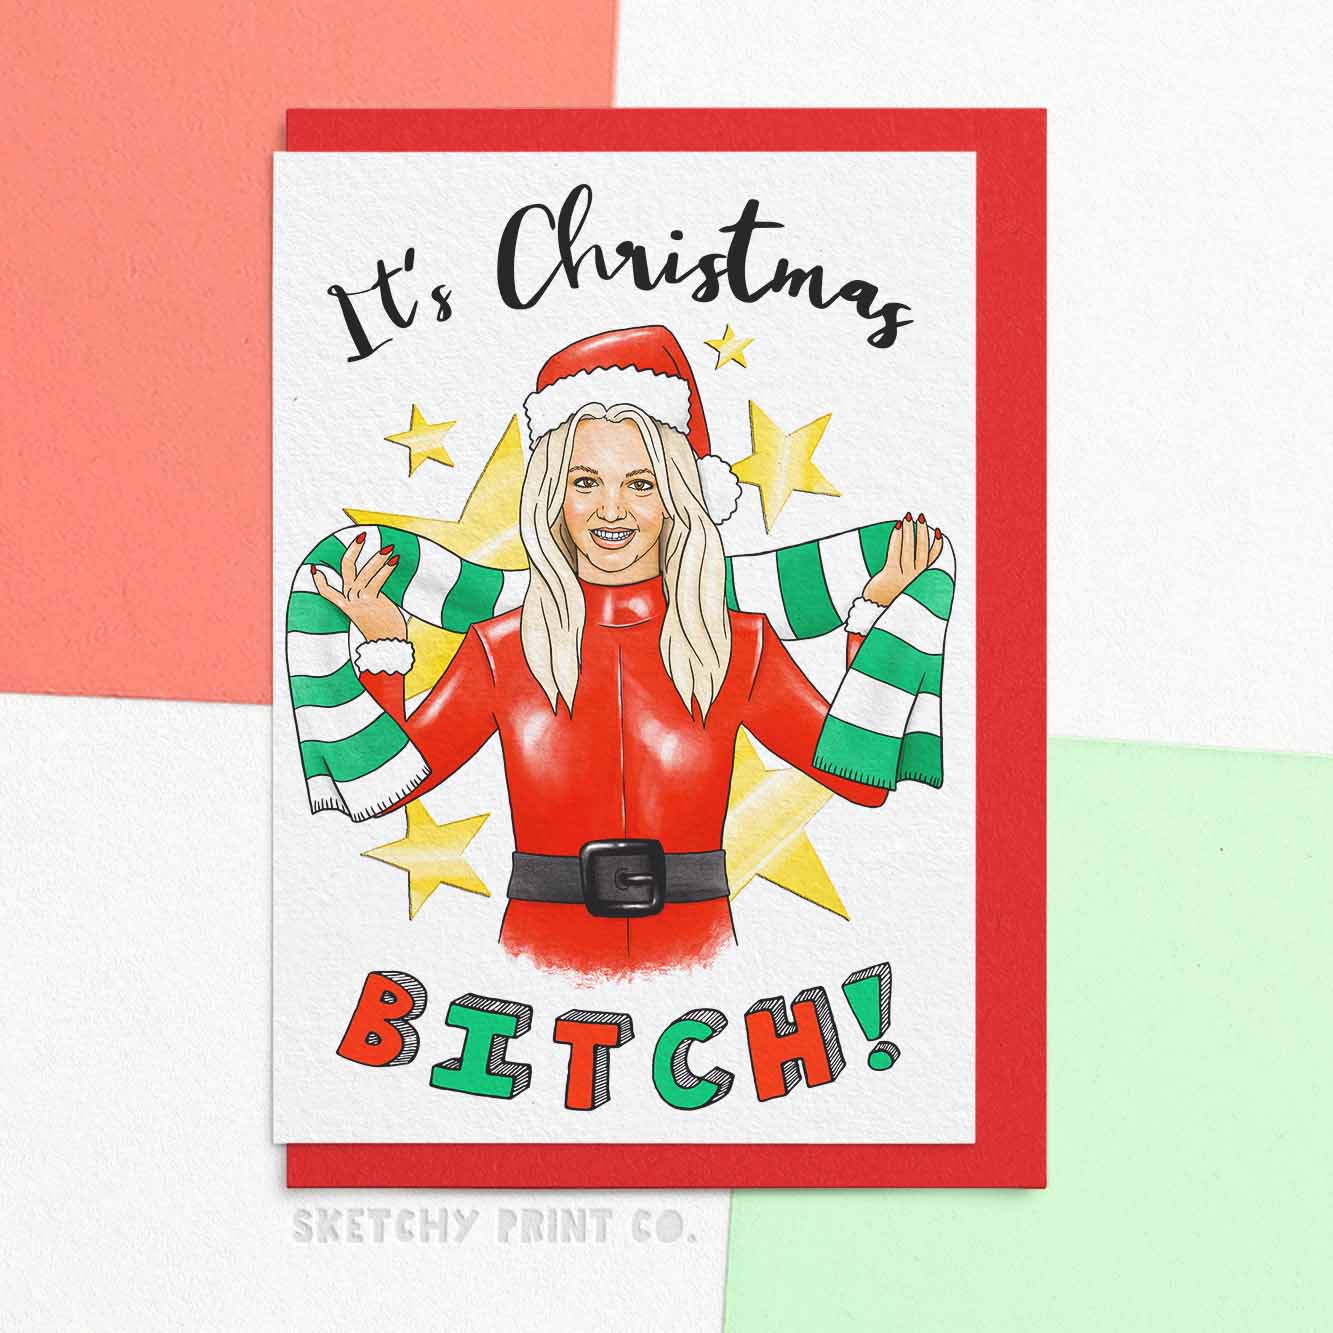 Funny Britney Christmas Card, It's Christmas Bitch! Funny Christmas Cards boyfriend girlfriend unique gift unusual hilarious illustrated sketchy print co  Edit alt text